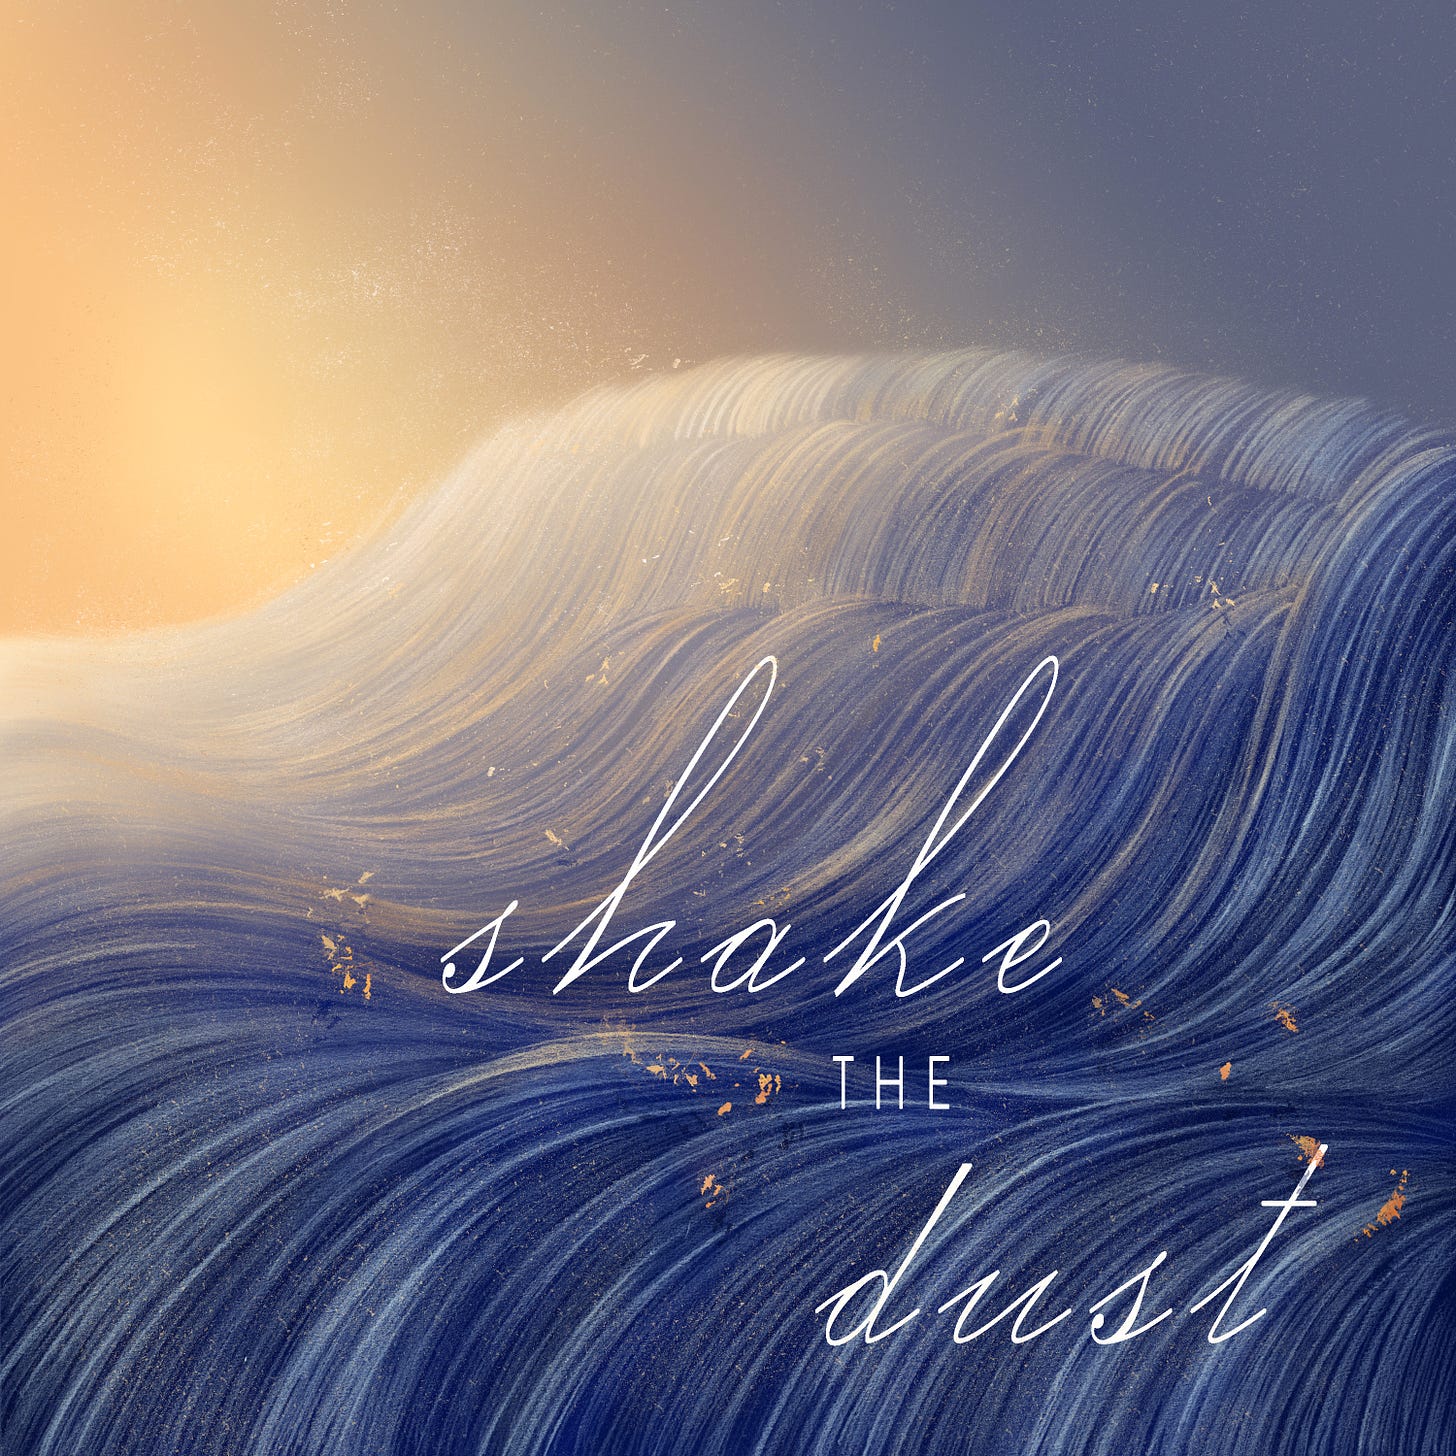 A square image. It is a somewhat abstract Illustration in warm, bright colors of a blue and white landscape with flecks of orange. The landscape itself is undulating in about 4 waves descending from the top right to bottom left corners of the image. The sun is partially visible on the top left and the sky is blue. White, cursive lettering spells out “Shake the Dust” across the ground